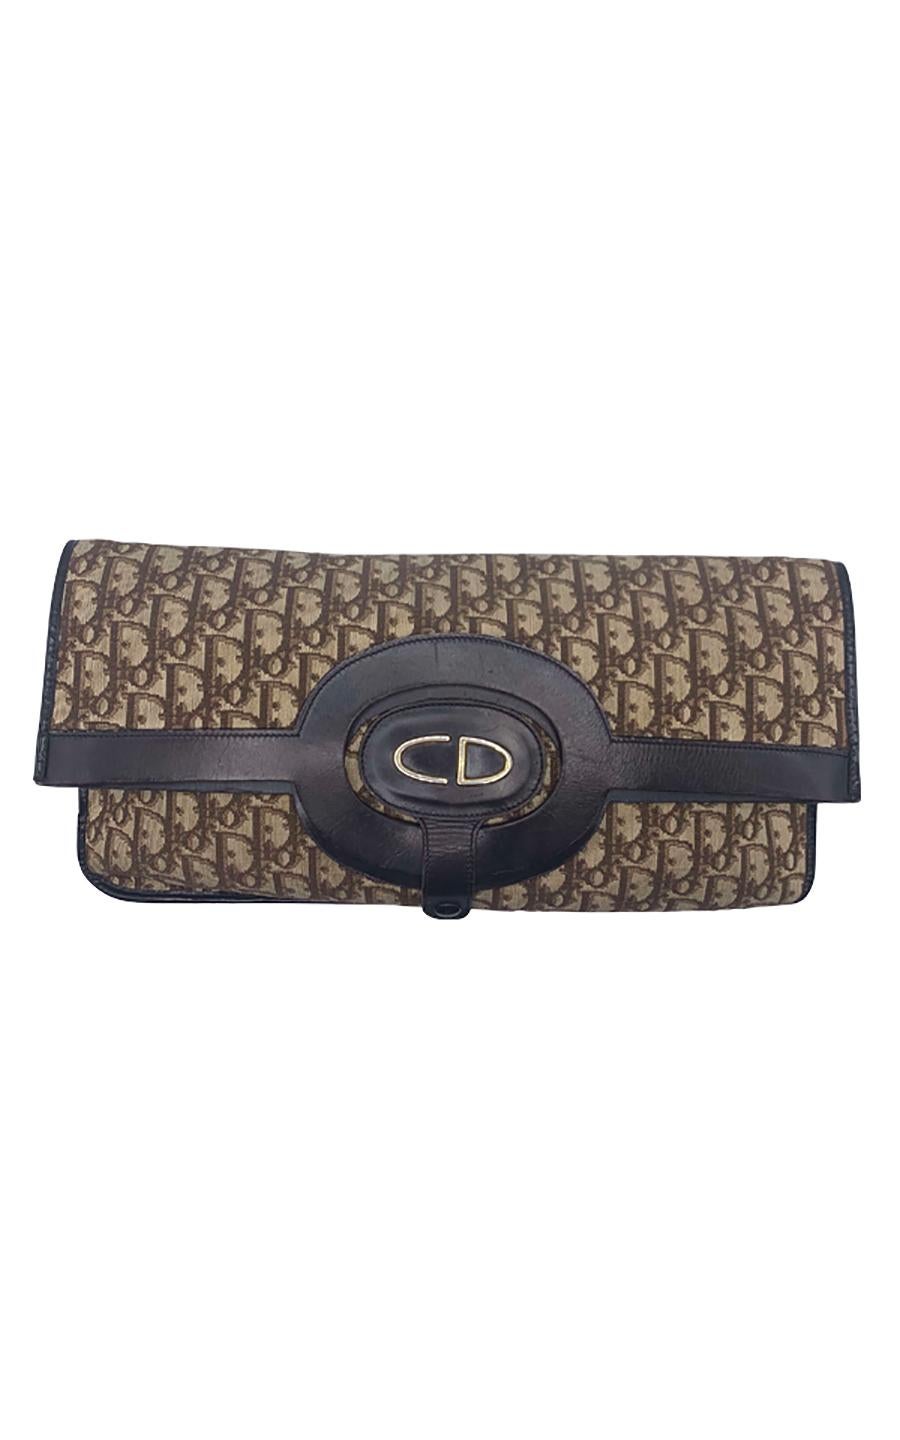 Vintage Christian Dior monogram canvas and leather fold-over envelope clutch, in excellent pre-loved condition. This iconic bag is notably known as the bag Carrie Bradshaw (Sarah Jessica Parker) wore in Sex and the City ‘To Market, To Market’